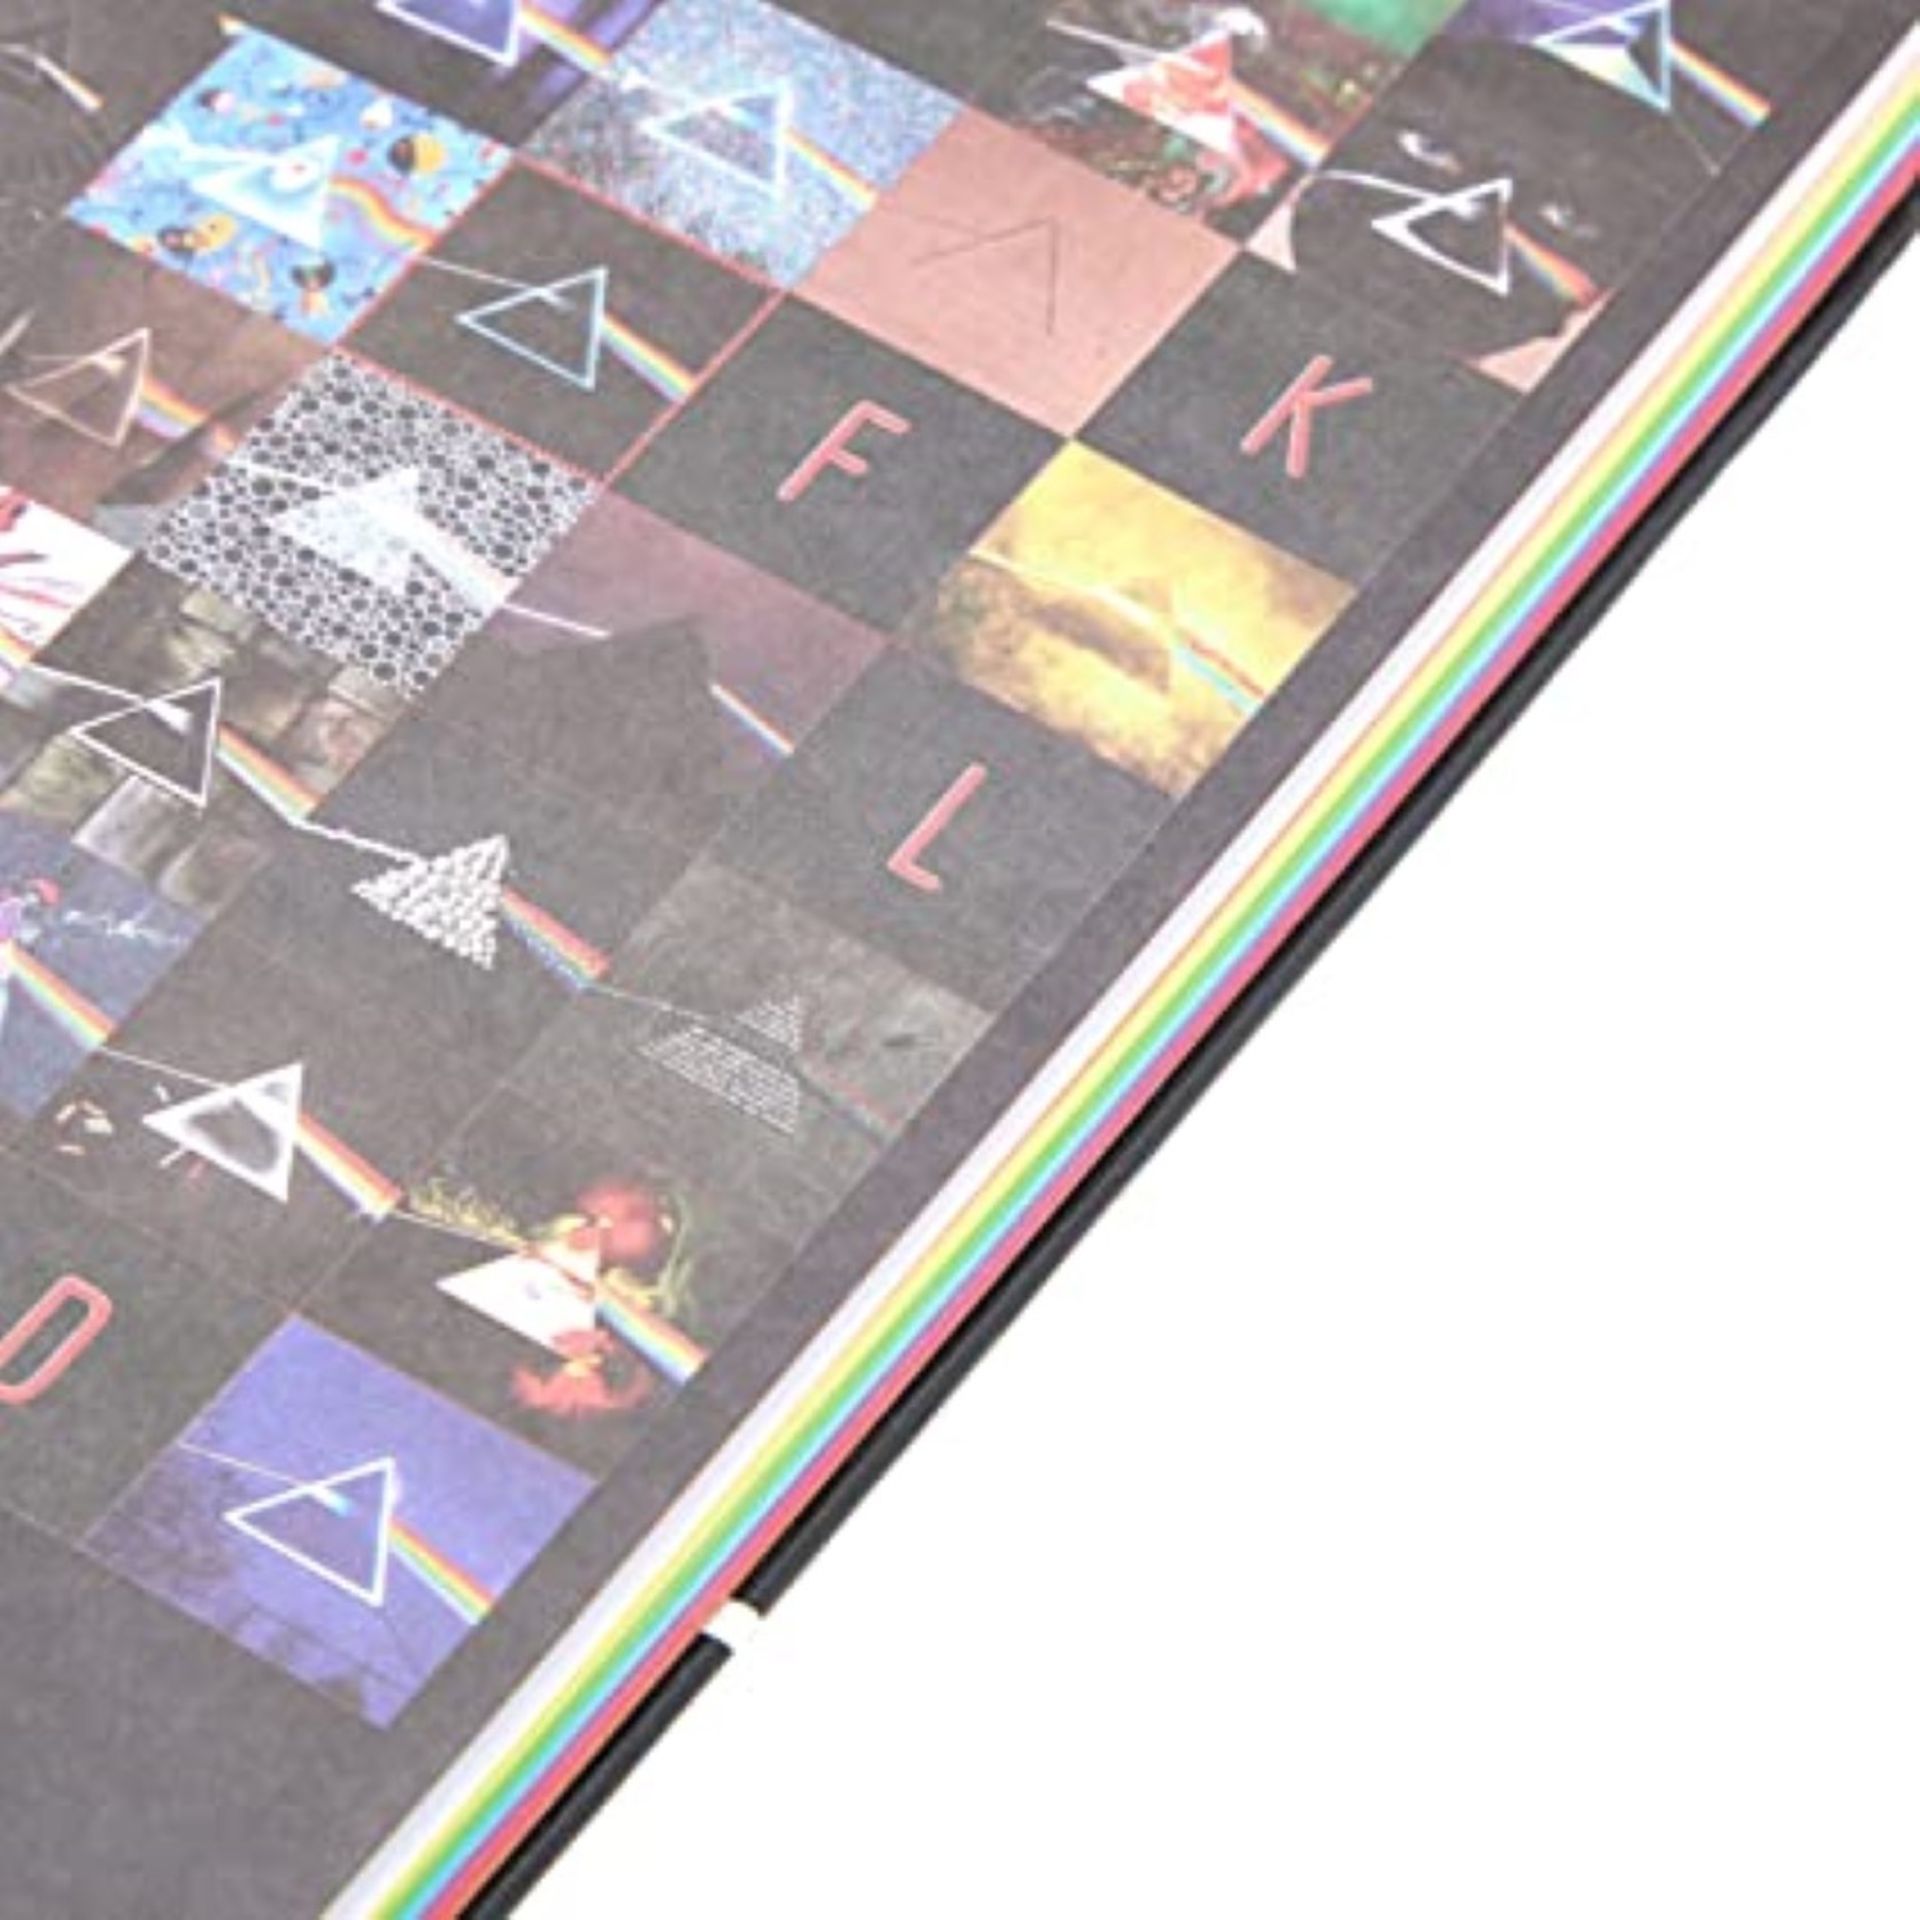 4 x Pink Floyd Darkside of the Moon Premium A5 Notebooks by Pyramid - RRP £48 - Image 2 of 8